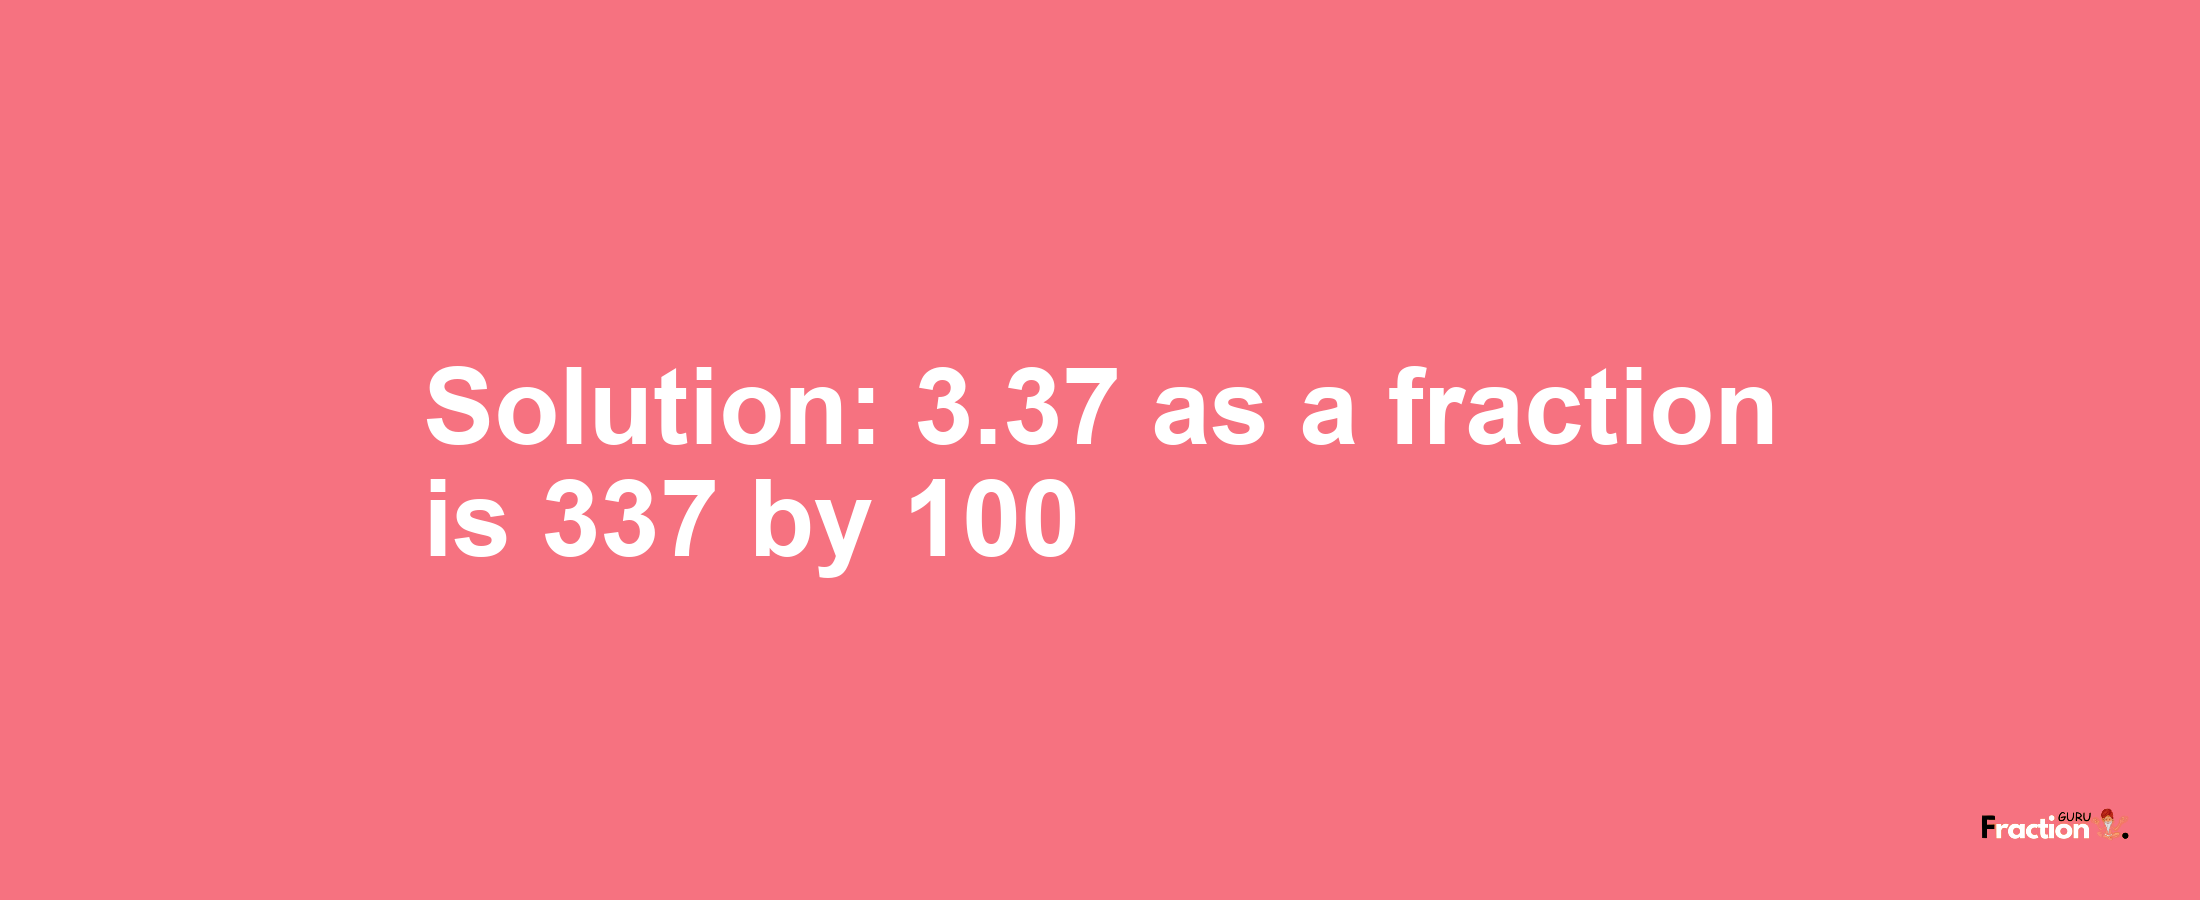 Solution:3.37 as a fraction is 337/100